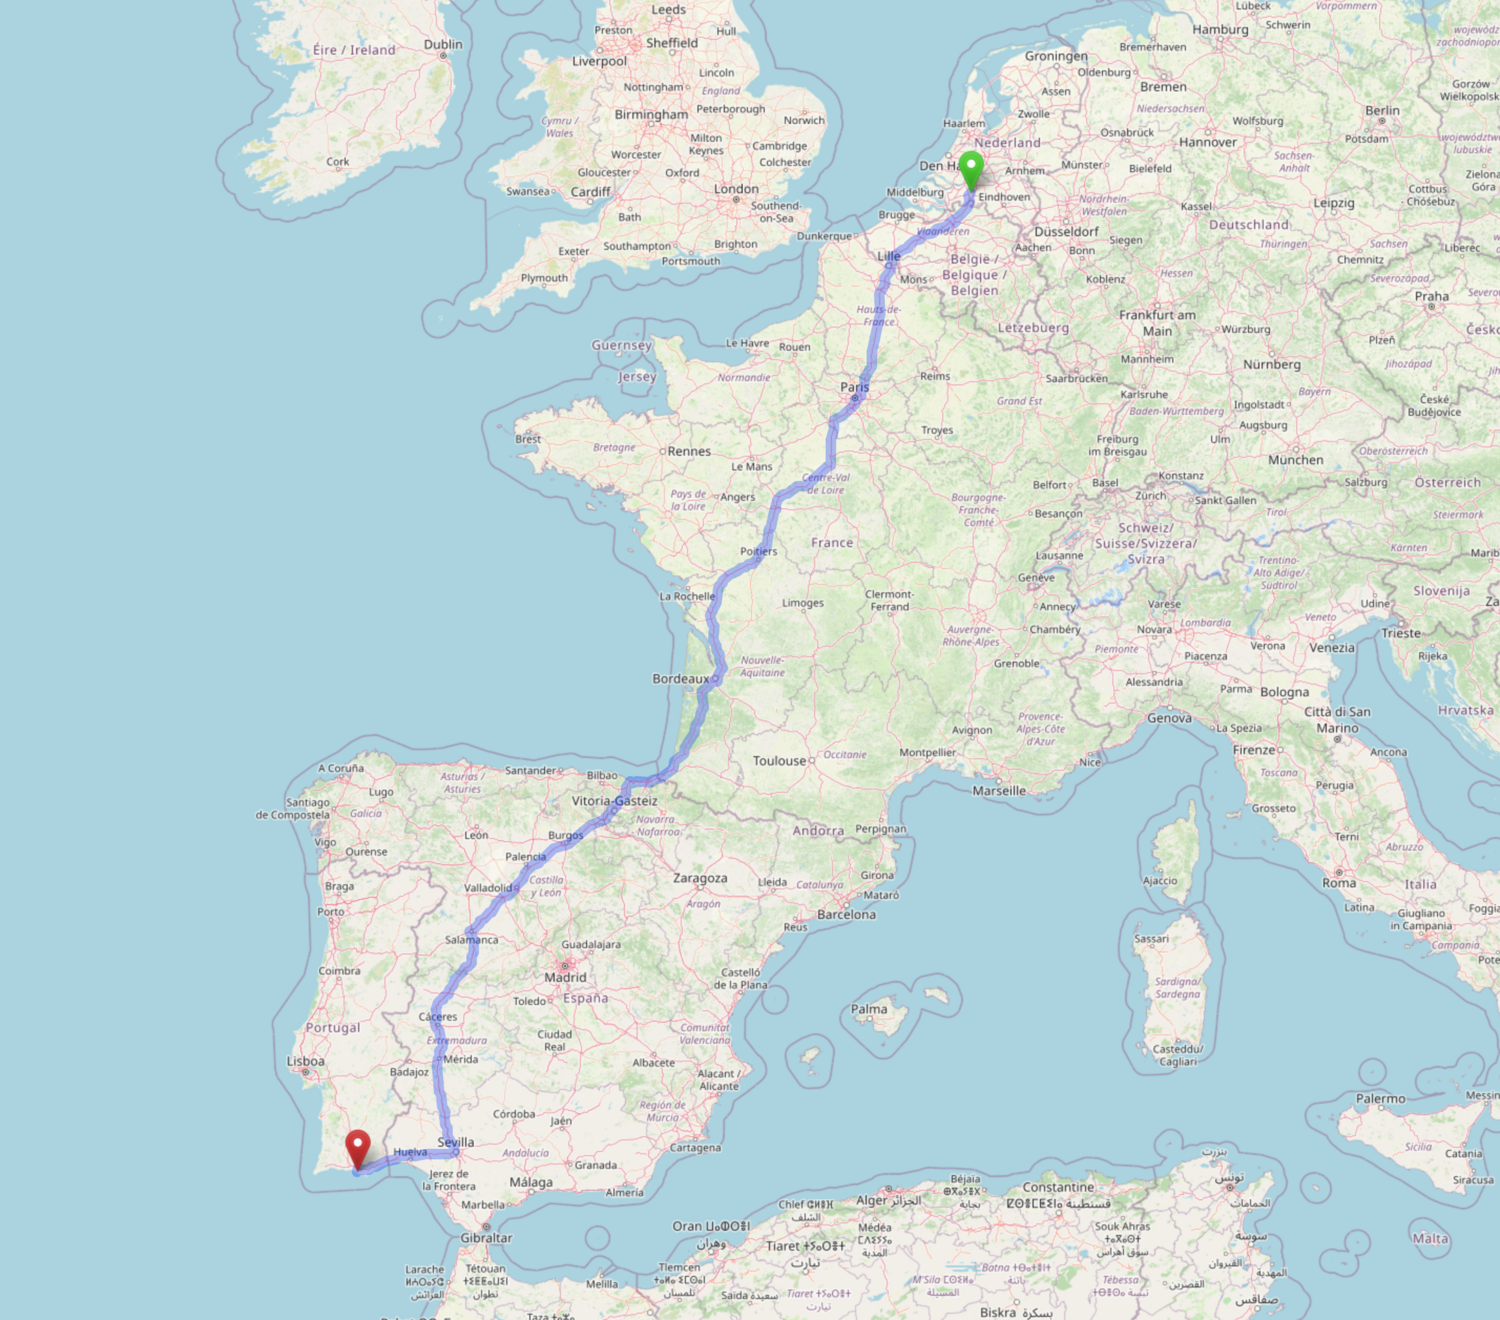 Our 2300km roadtrip from home (Breda, Netherlands) to our AirBNB in Portugal (Almancil).